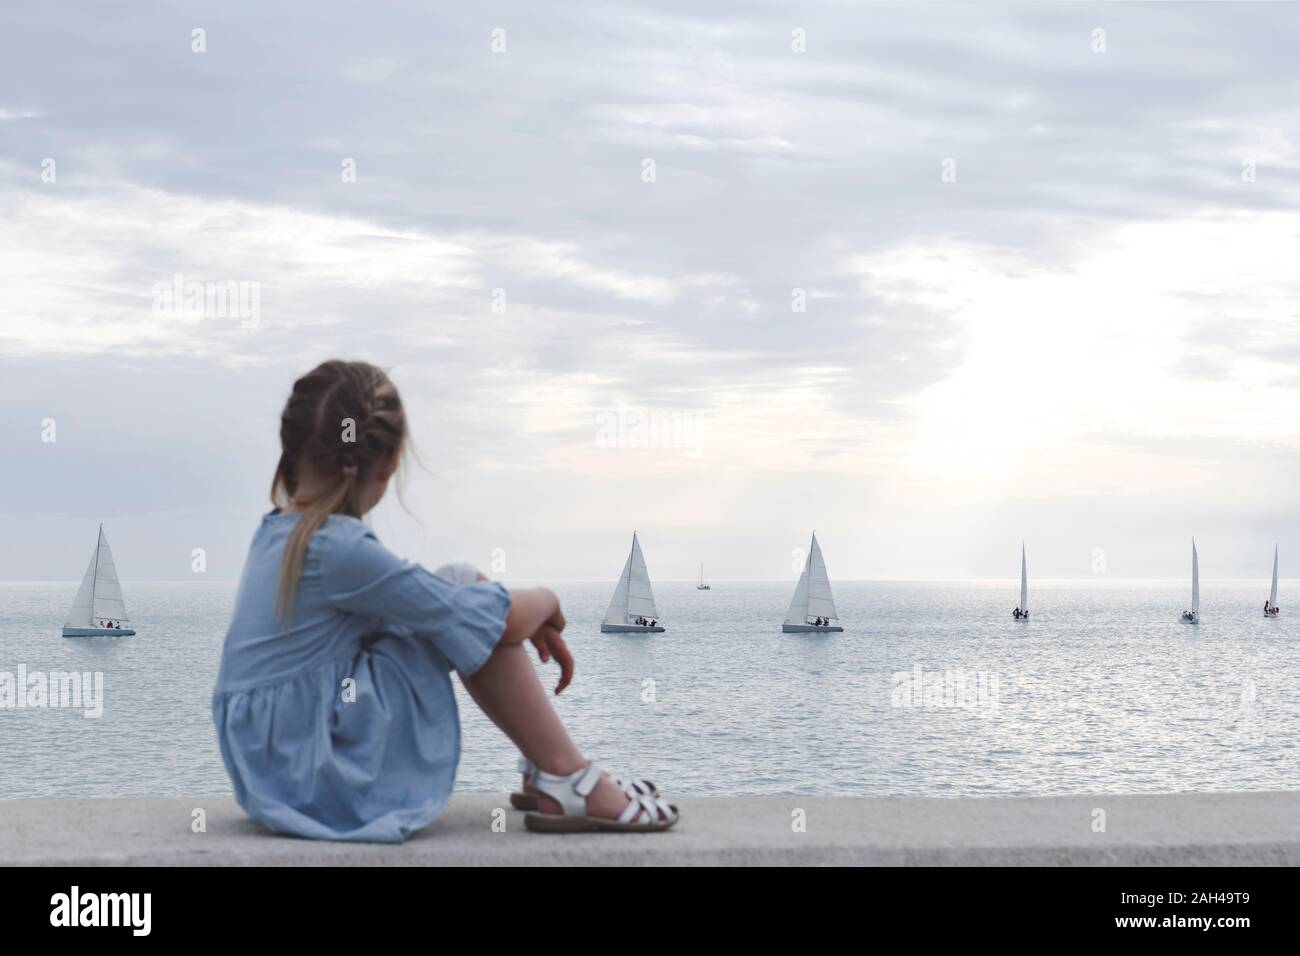 Lttle girl looking at the sea with boats Stock Photo